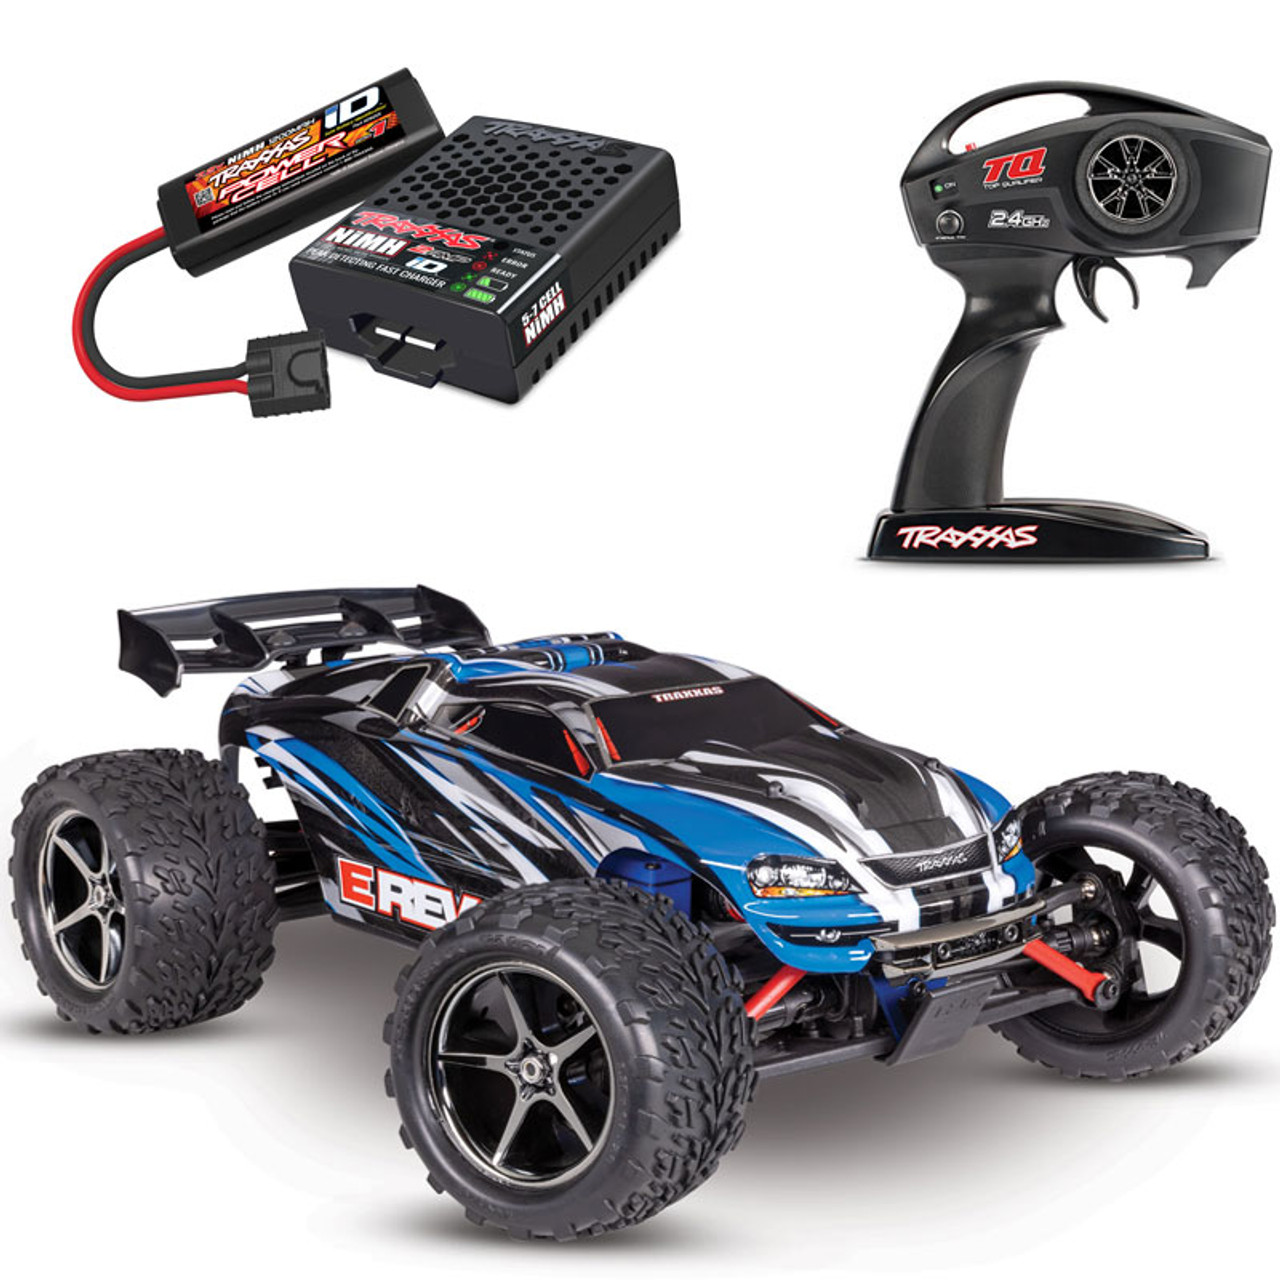 Traxxas 1/16 E-Revo Brushed 4WD RTR RC Monster Truck w/ID